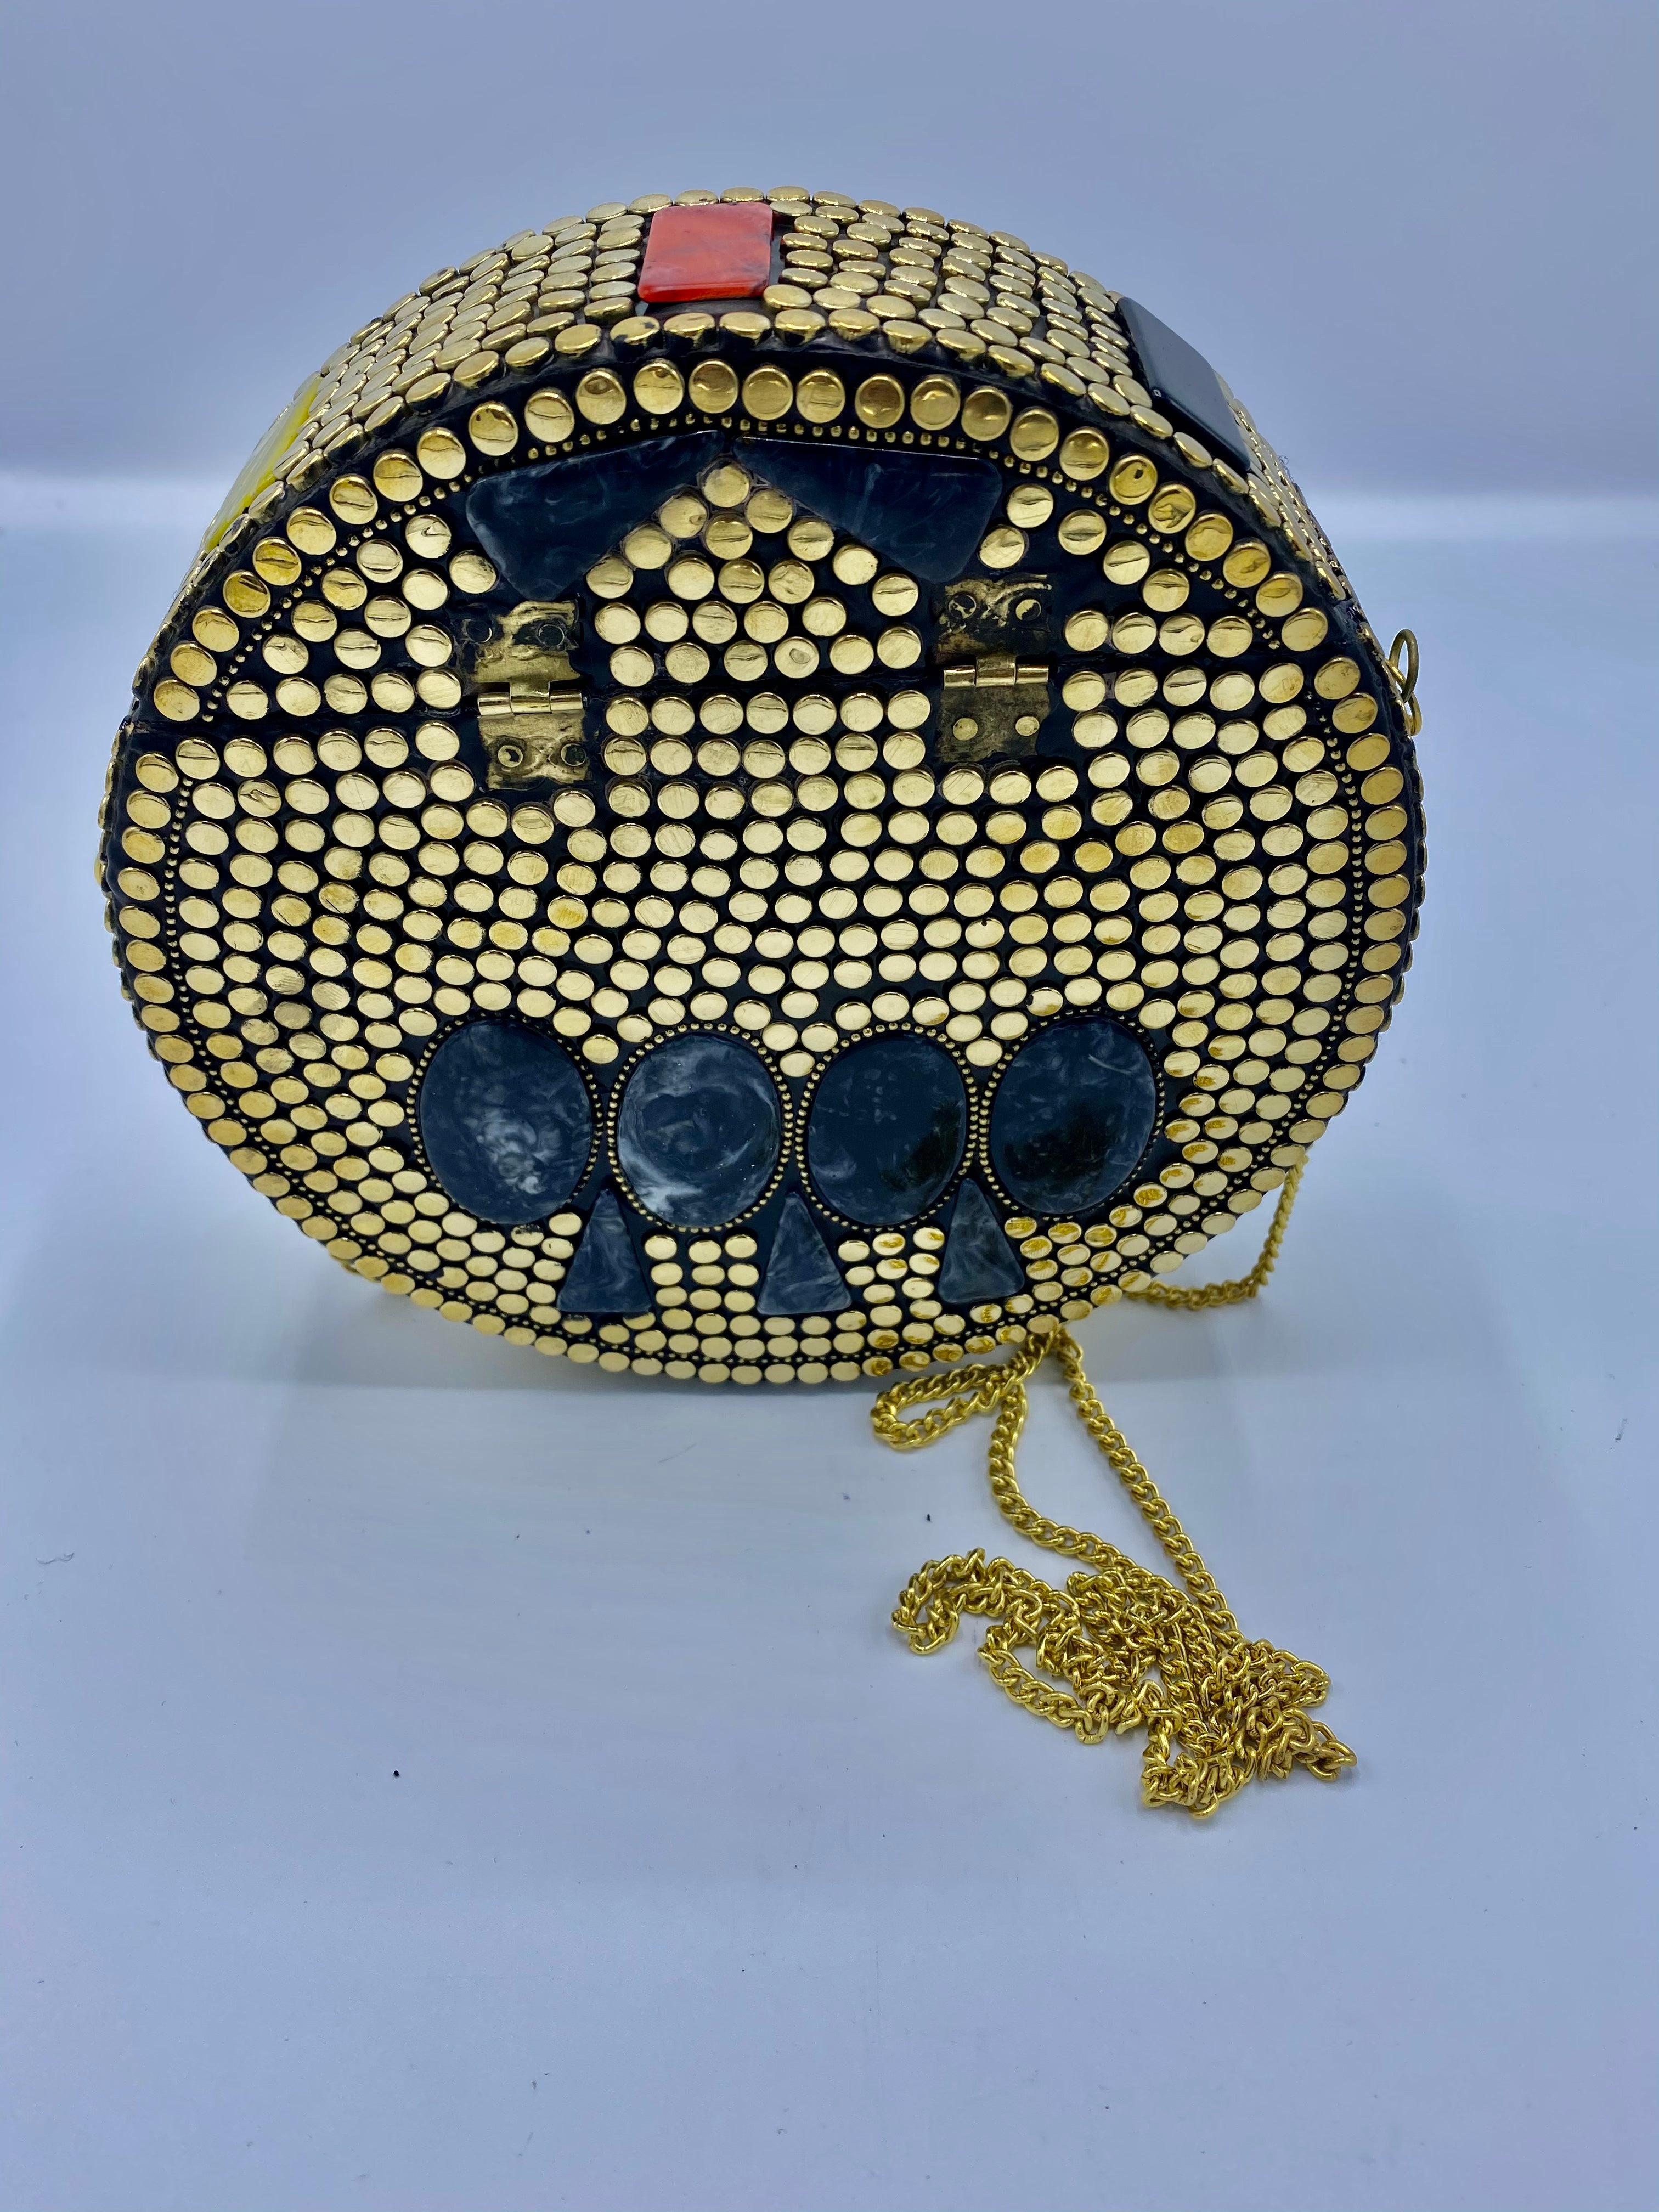 Round Gold Buttons with Black Stones Design Clutch